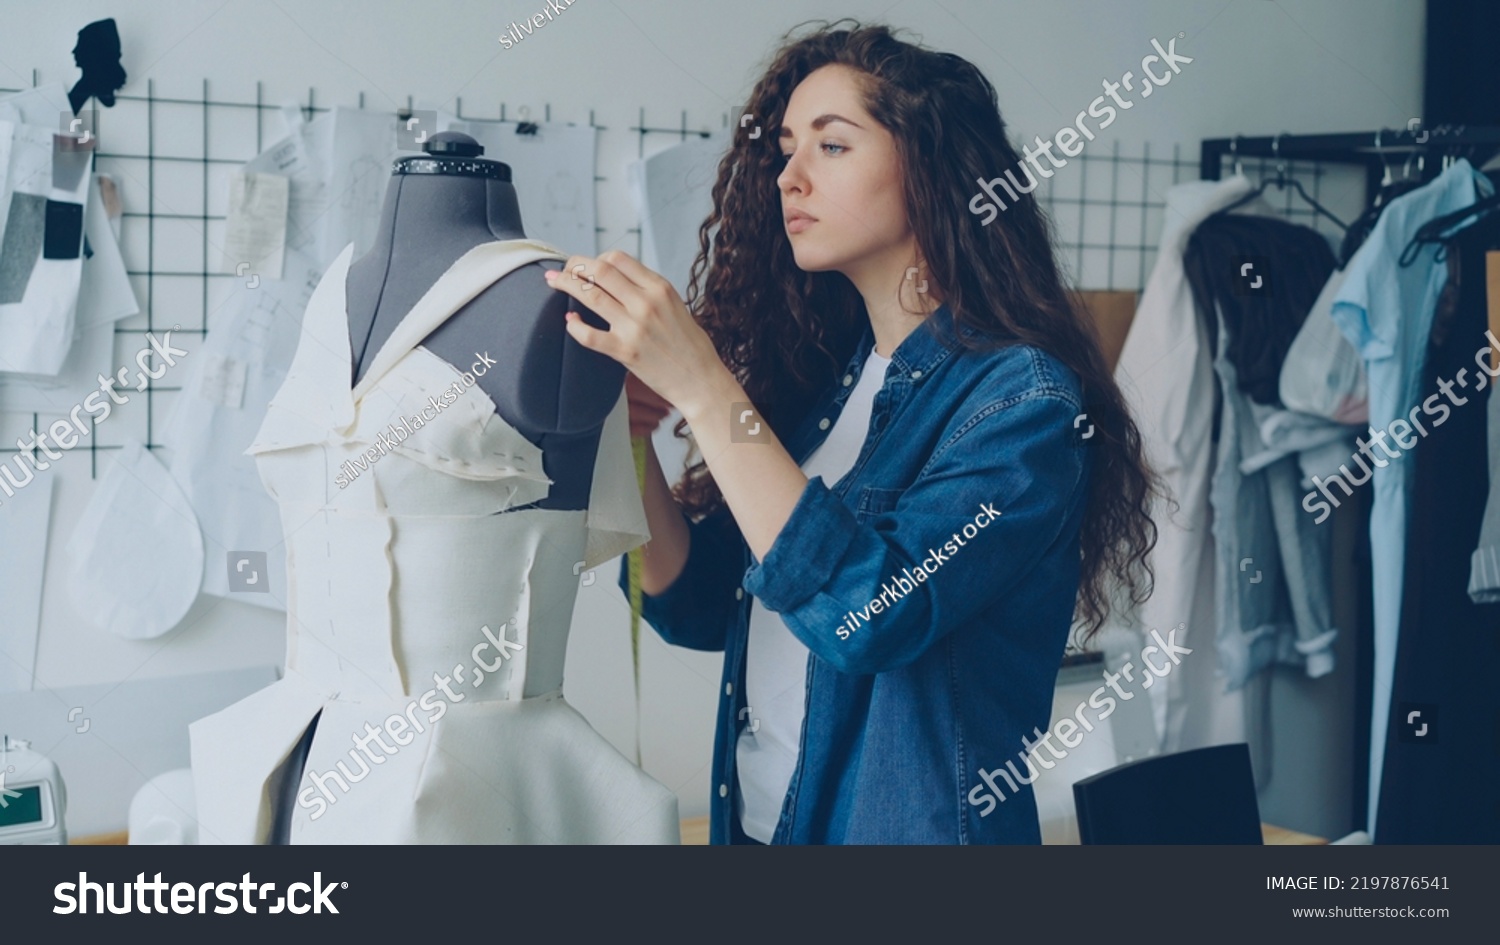 Young female tailor is adjusting clothes on tailoring dummy with sewing pins and measuring with measure-tape. Women's garments, sketches on wall, tailoring items and tools are visible. #2197876541